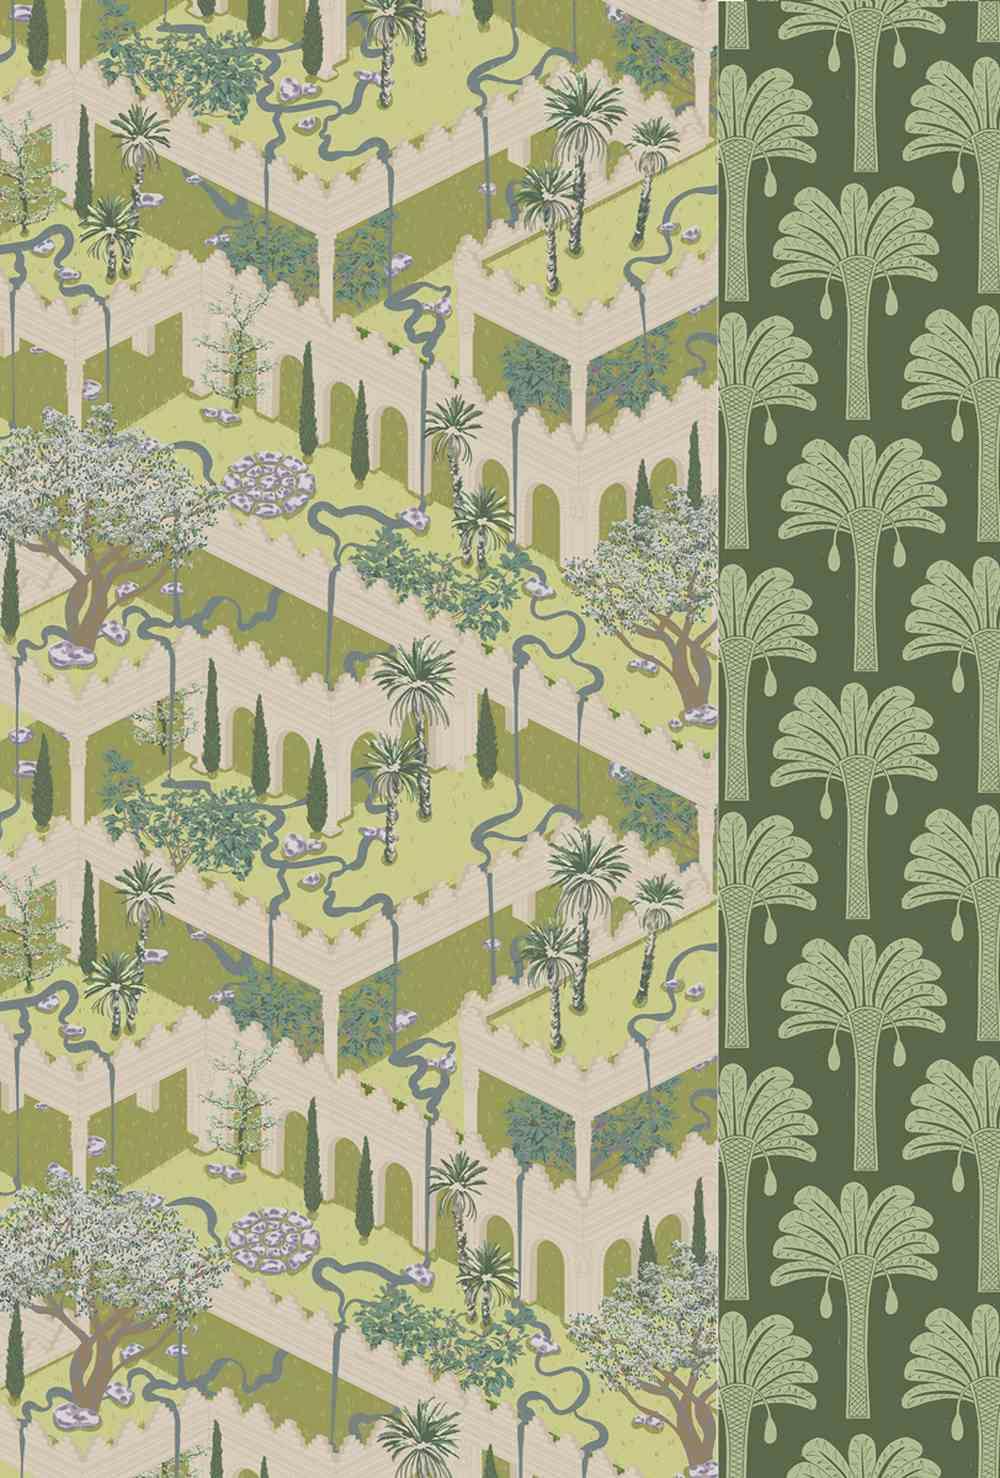 A digital illustration featuring two different patterns side by side. The first pattern consists of three quarters of the design and features a white ornate palace with trees dotted around. The second pattern features green palm trees against a dark green background.